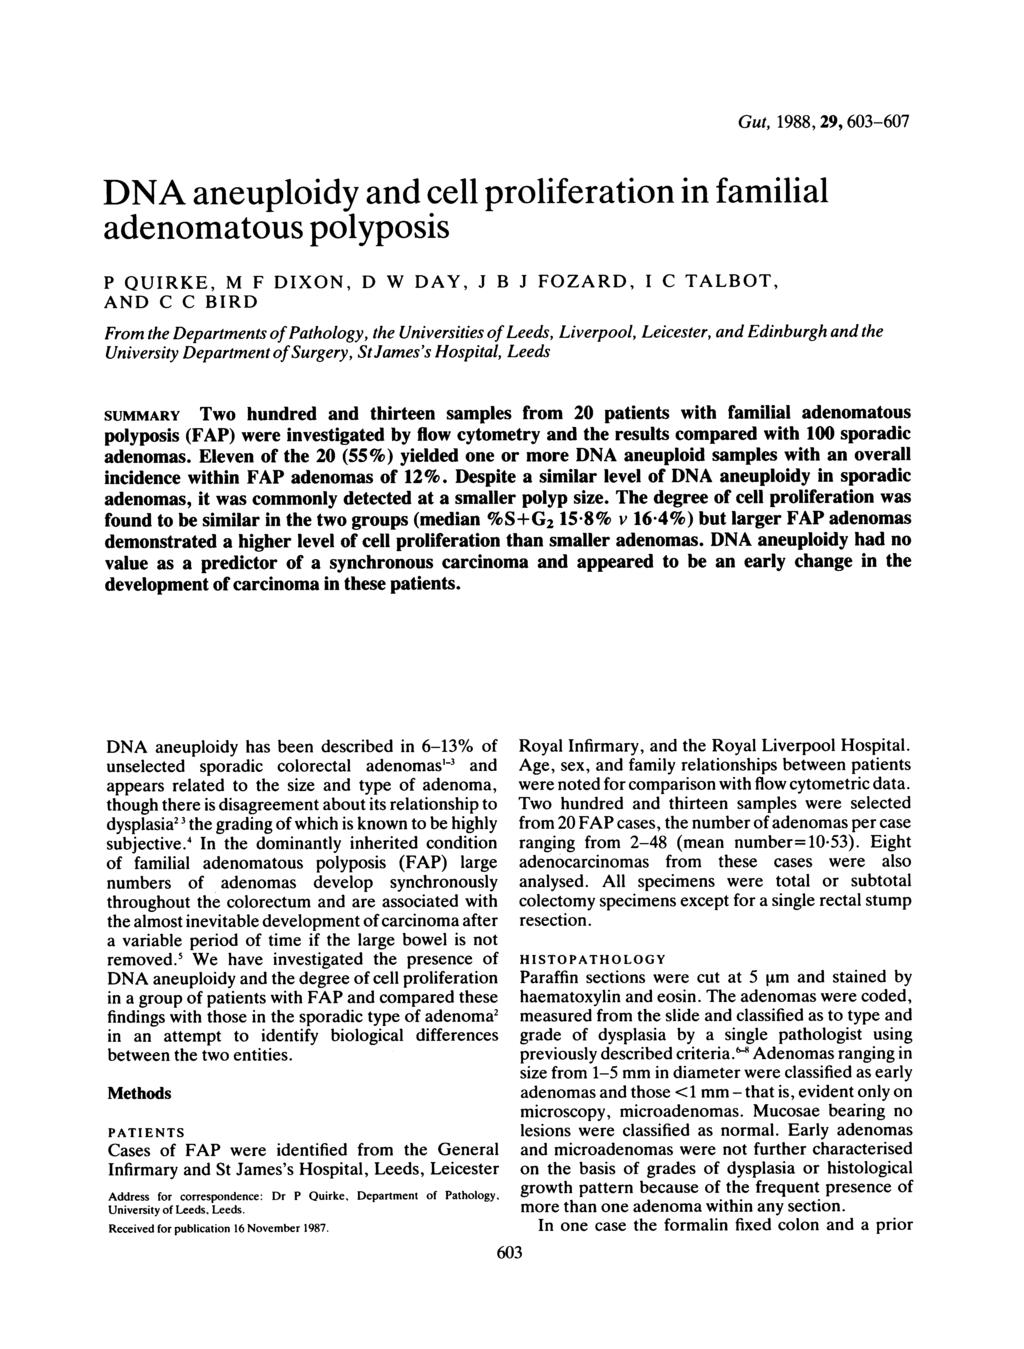 Gut, 1988, 29, 63-67 DNA aneuploidy and cell proliferation in familial adenomatous polyposis P QUIRKE, M F DIXON, D W DAY, J B J FOZARD, I C TALBOT, AND C C BIRD From the Departments ofpathology, the